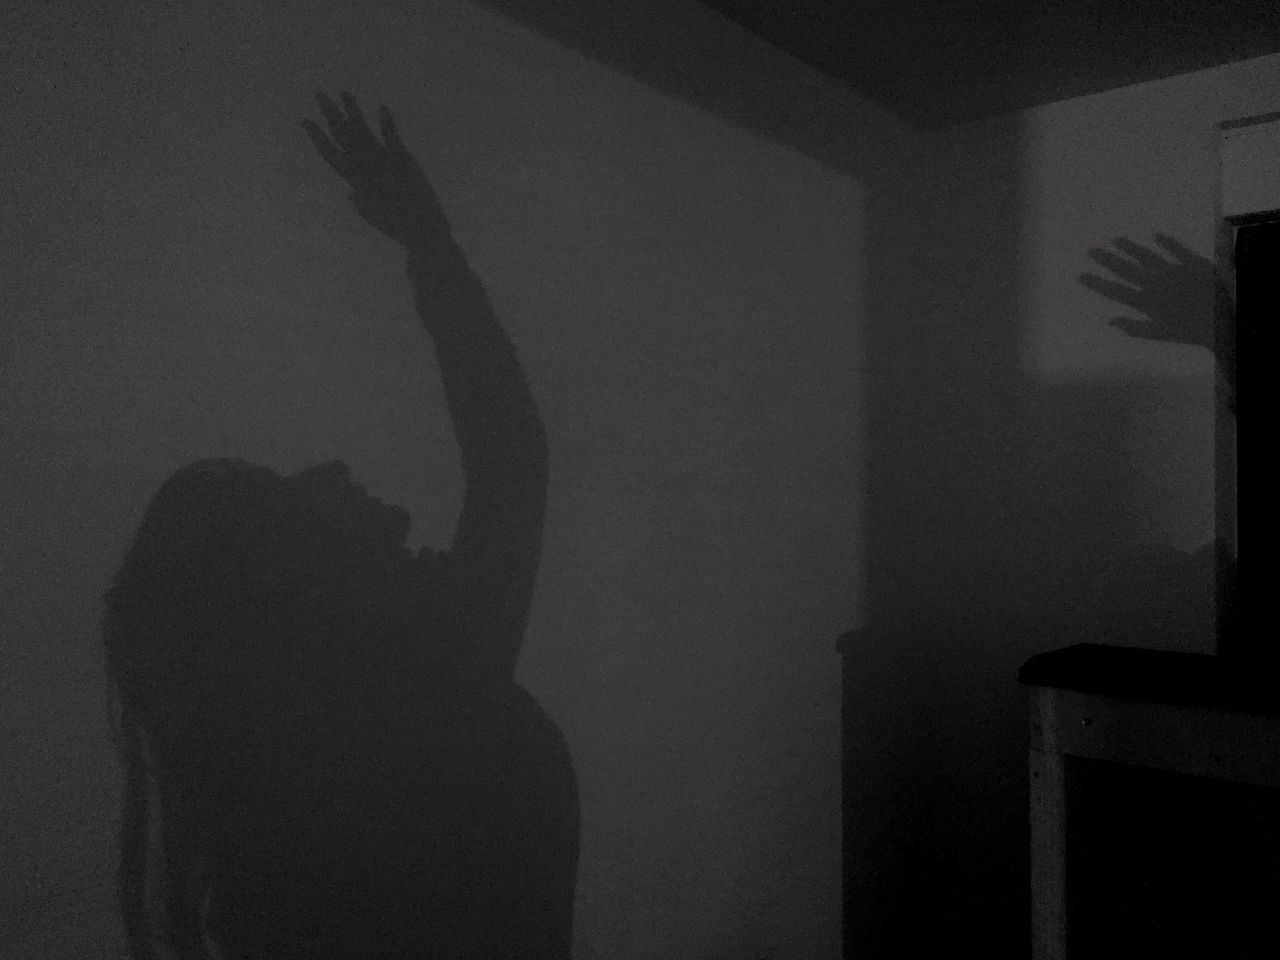 real people, lifestyles, one person, human arm, indoors, silhouette, arms raised, wall - building feature, leisure activity, shadow, architecture, dancing, standing, unrecognizable person, women, adult, hand raised, hand, wall, focus on shadow